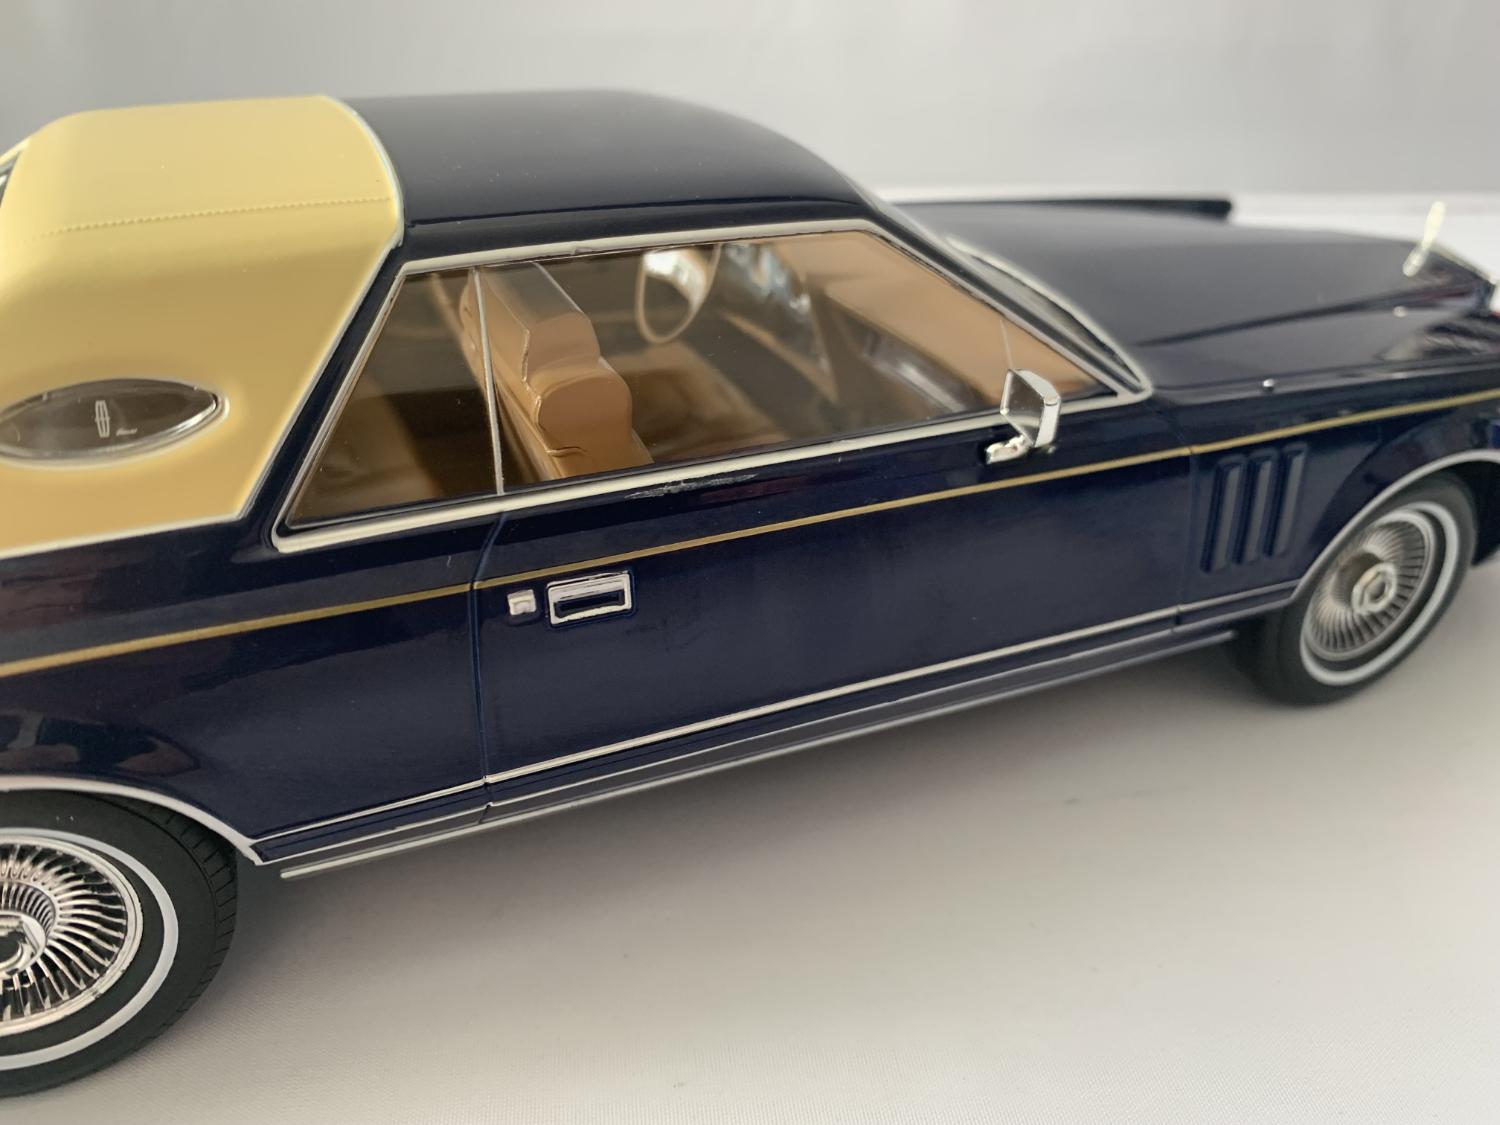 Lincoln Continental mk5 1977 in blue 1:18 scale model from Model Car Group, 18215